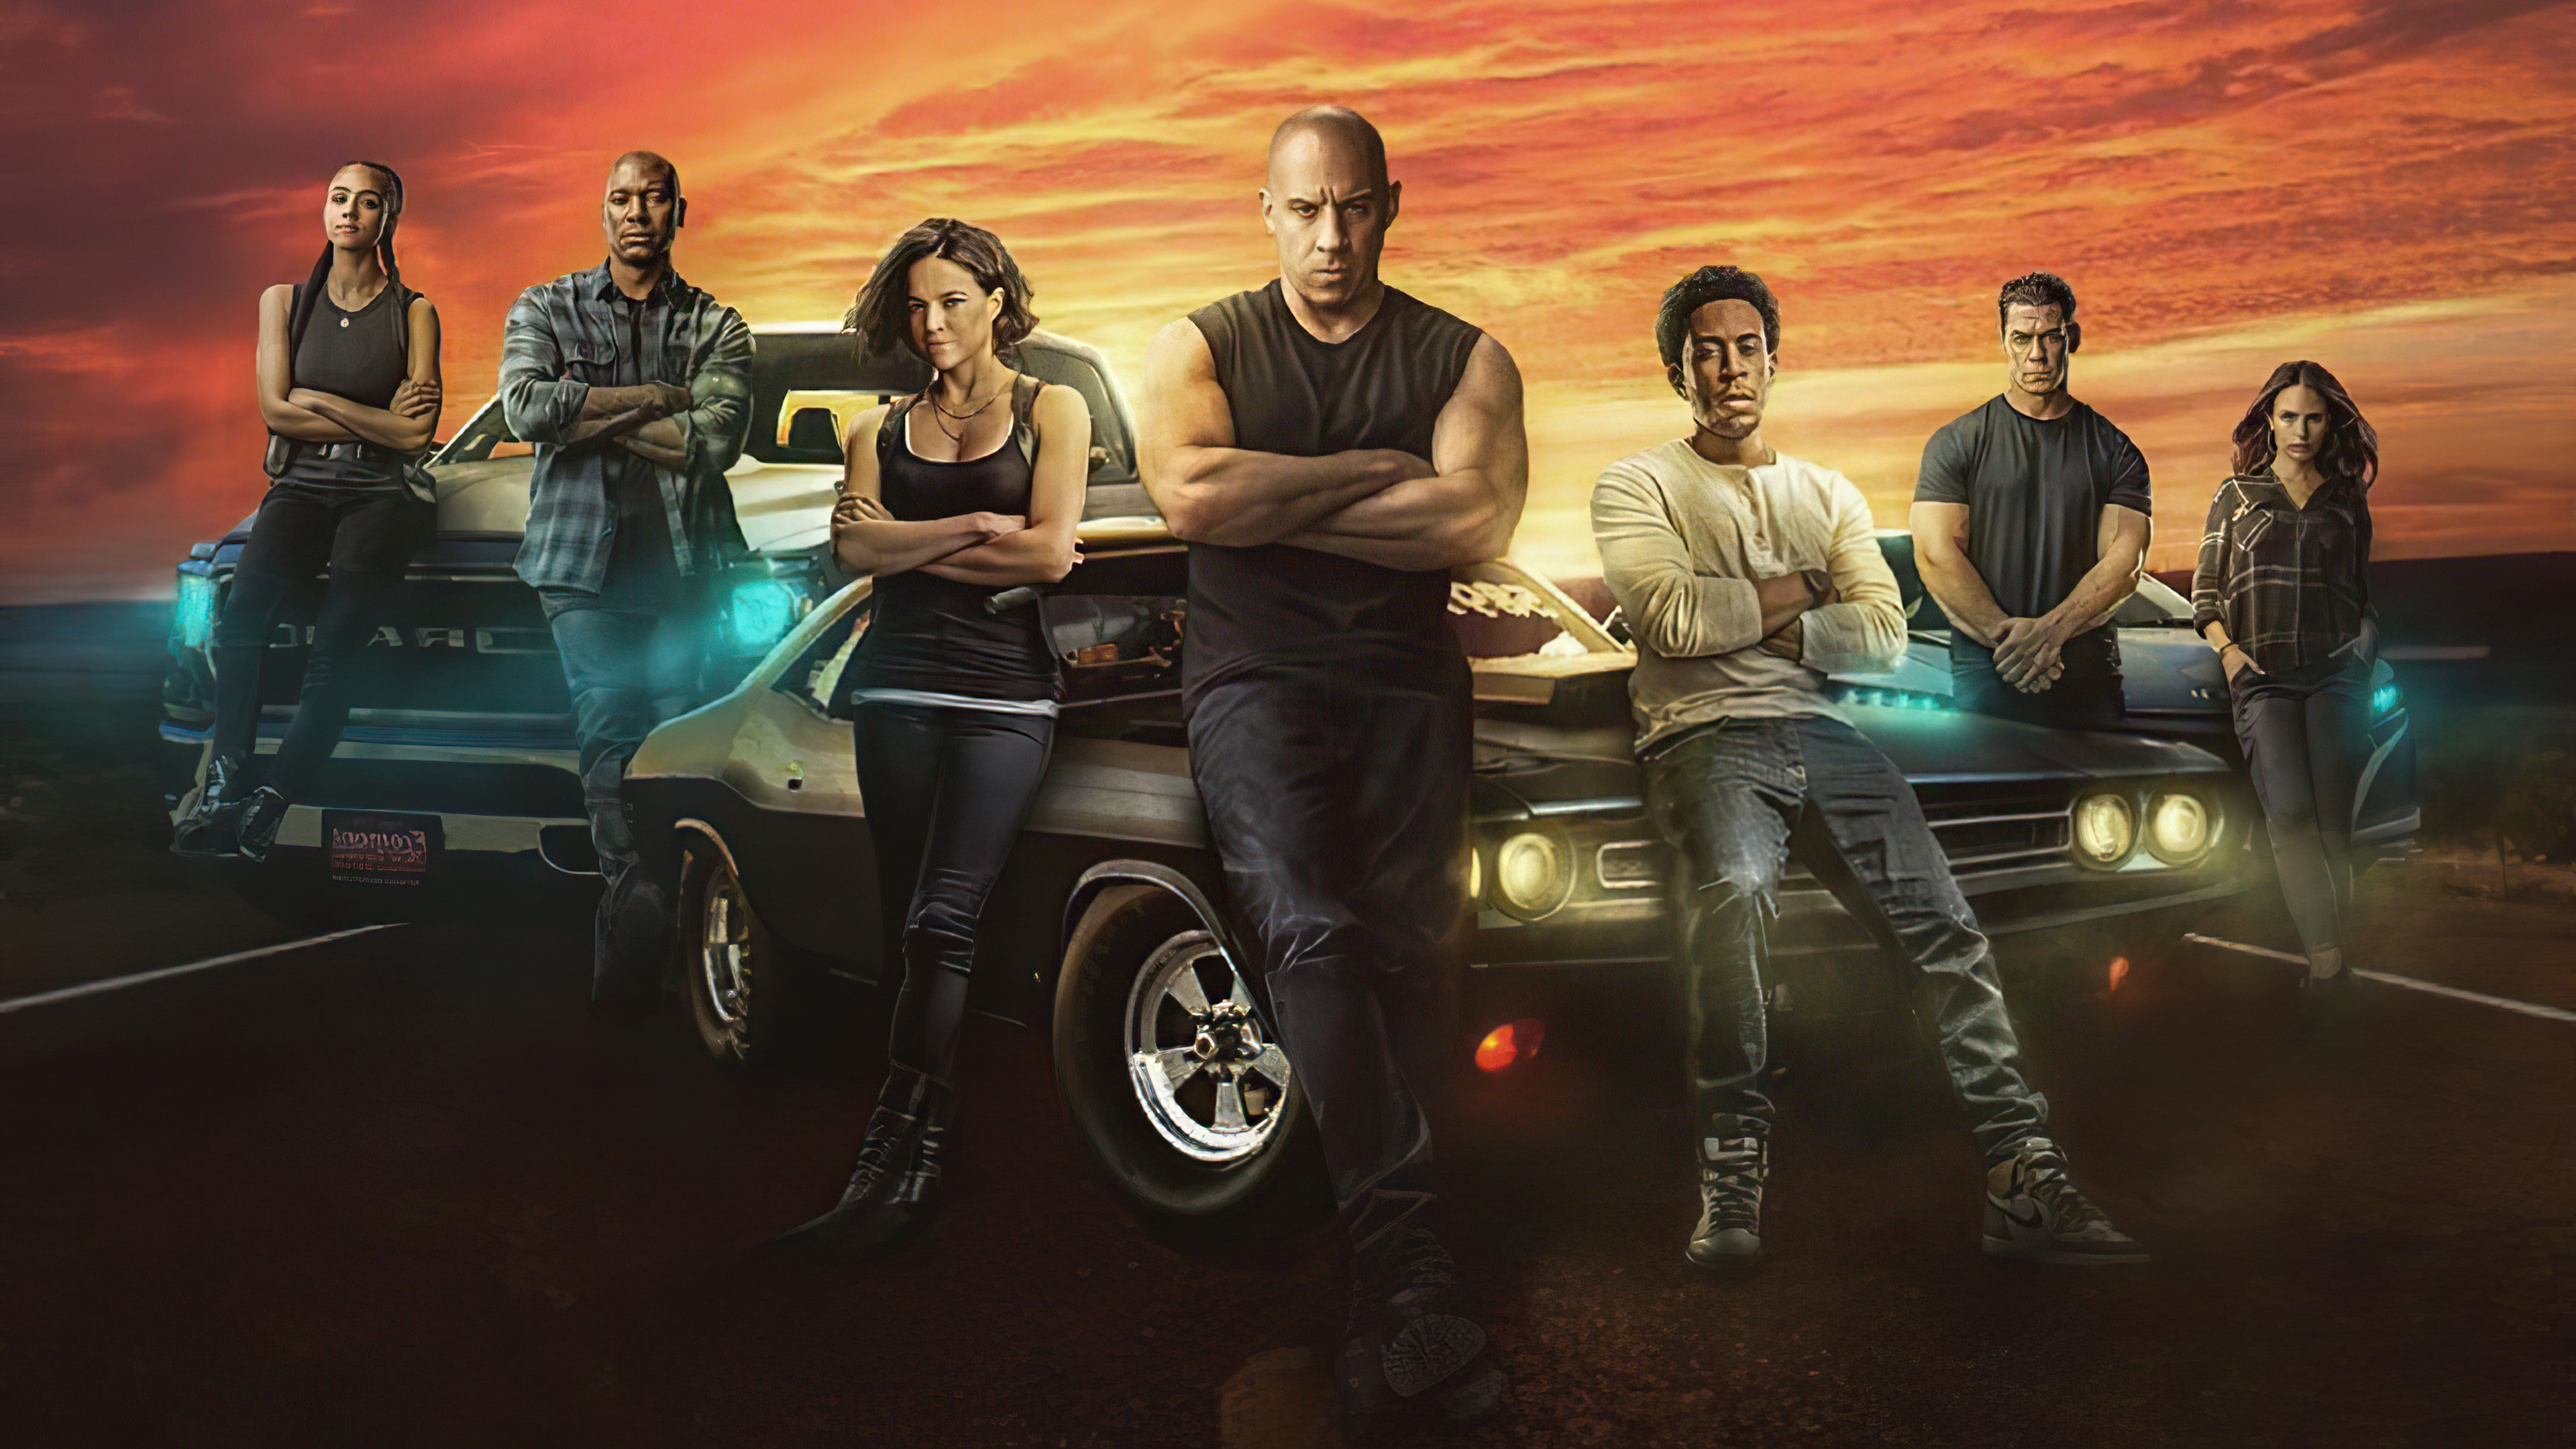 4K Fast And Furious 9 Wallpaper, HD Movies 4K Wallpapers ...